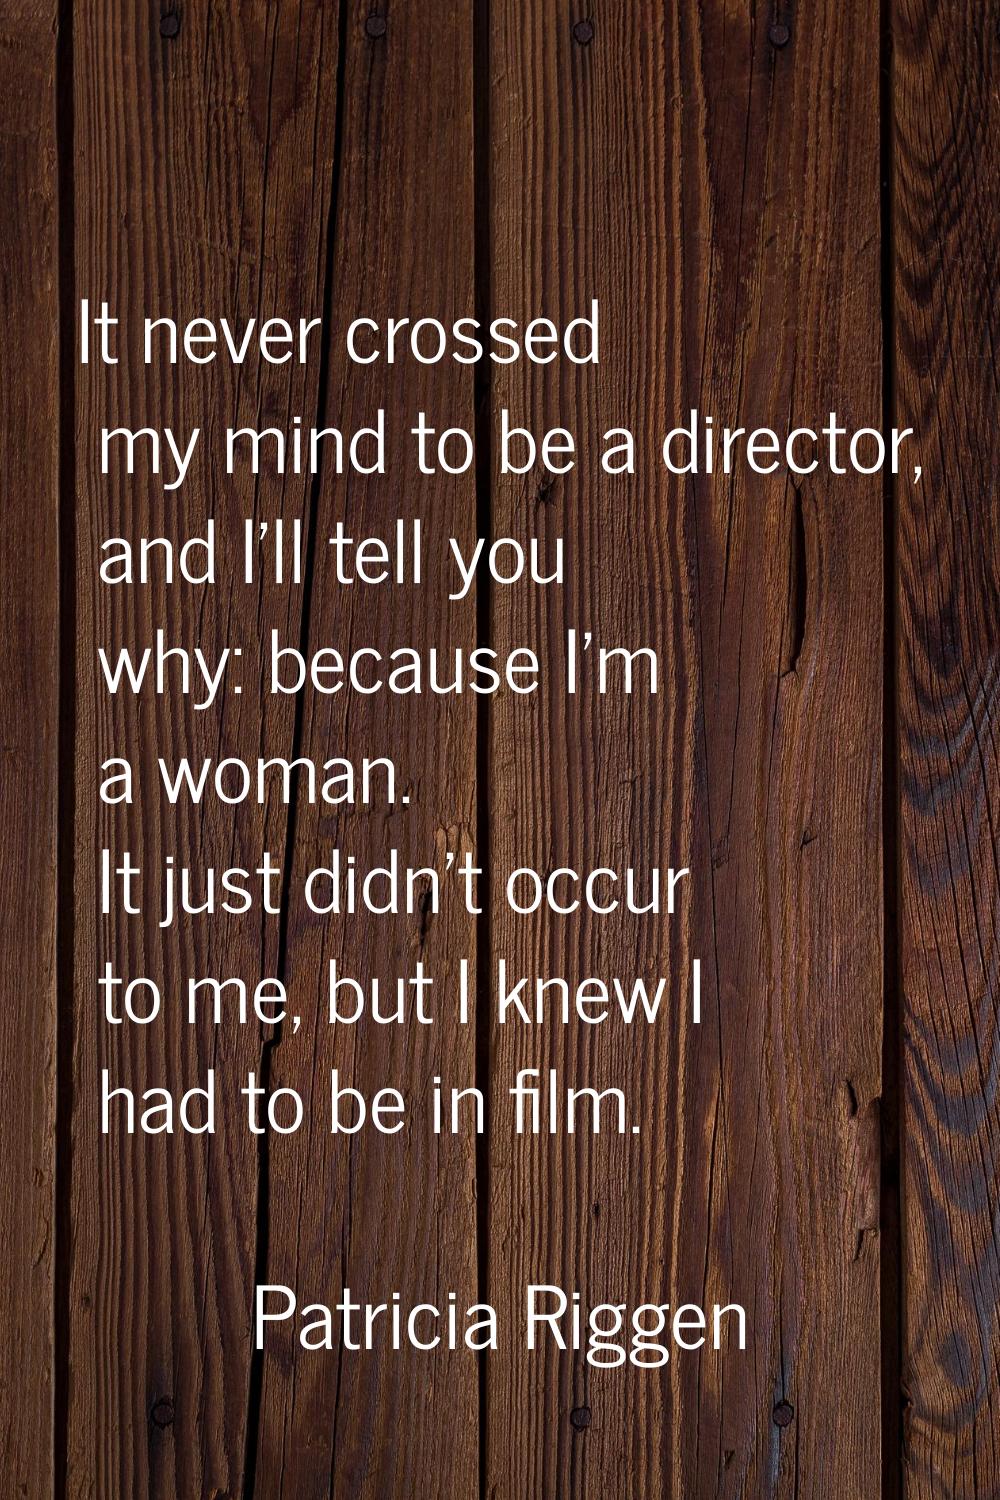 It never crossed my mind to be a director, and I'll tell you why: because I'm a woman. It just didn